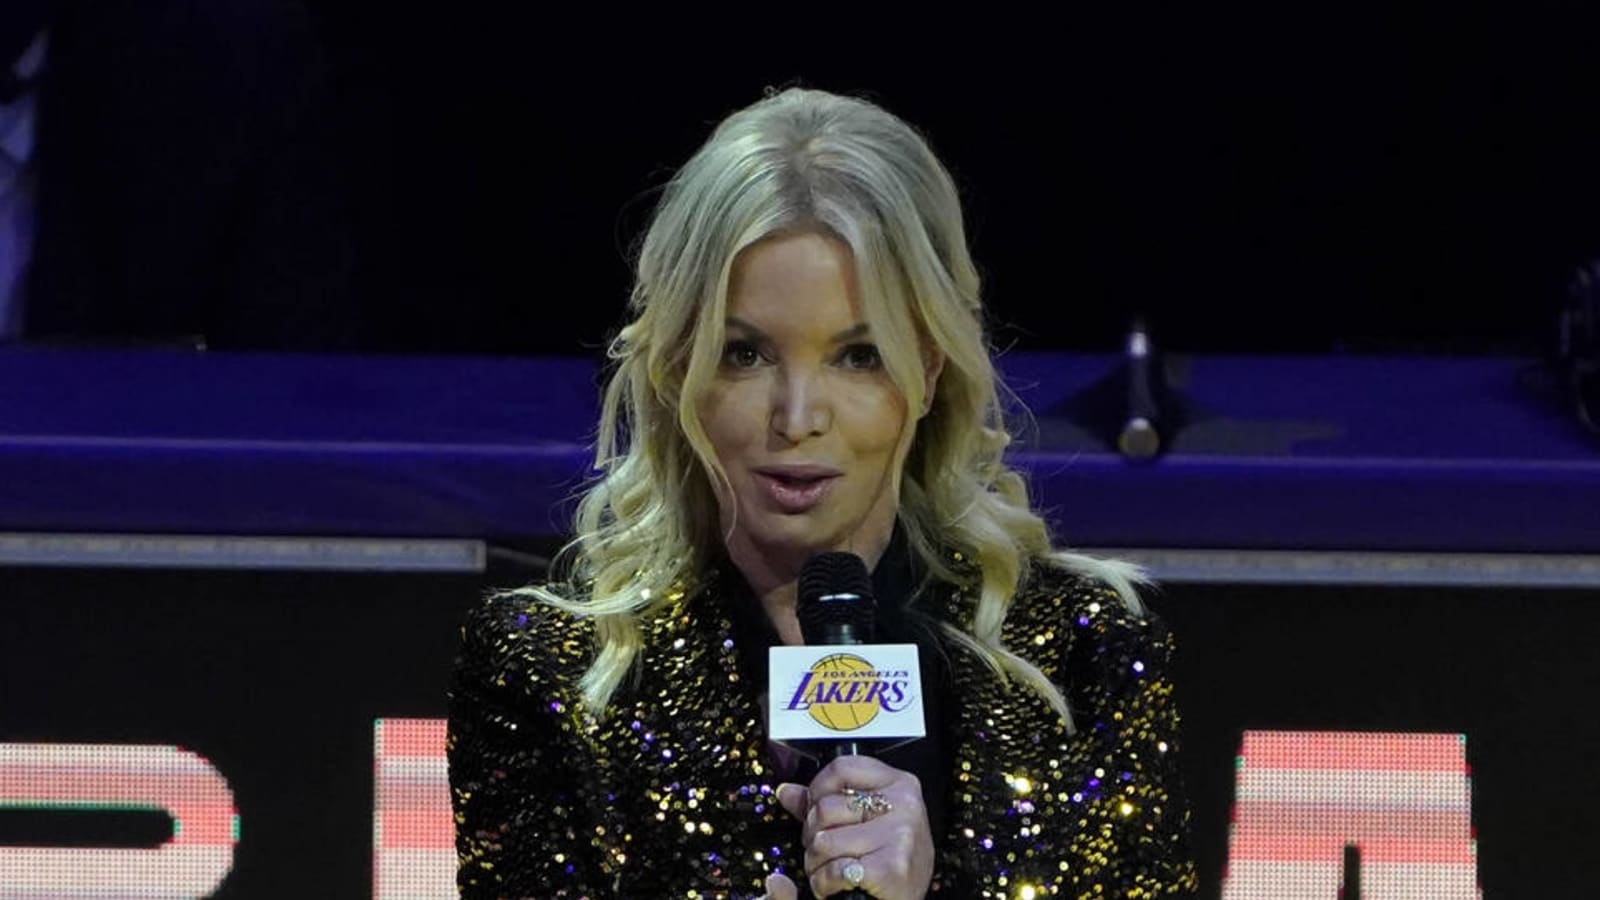 Lakers owner Jeanie Buss received death threats from fans last season